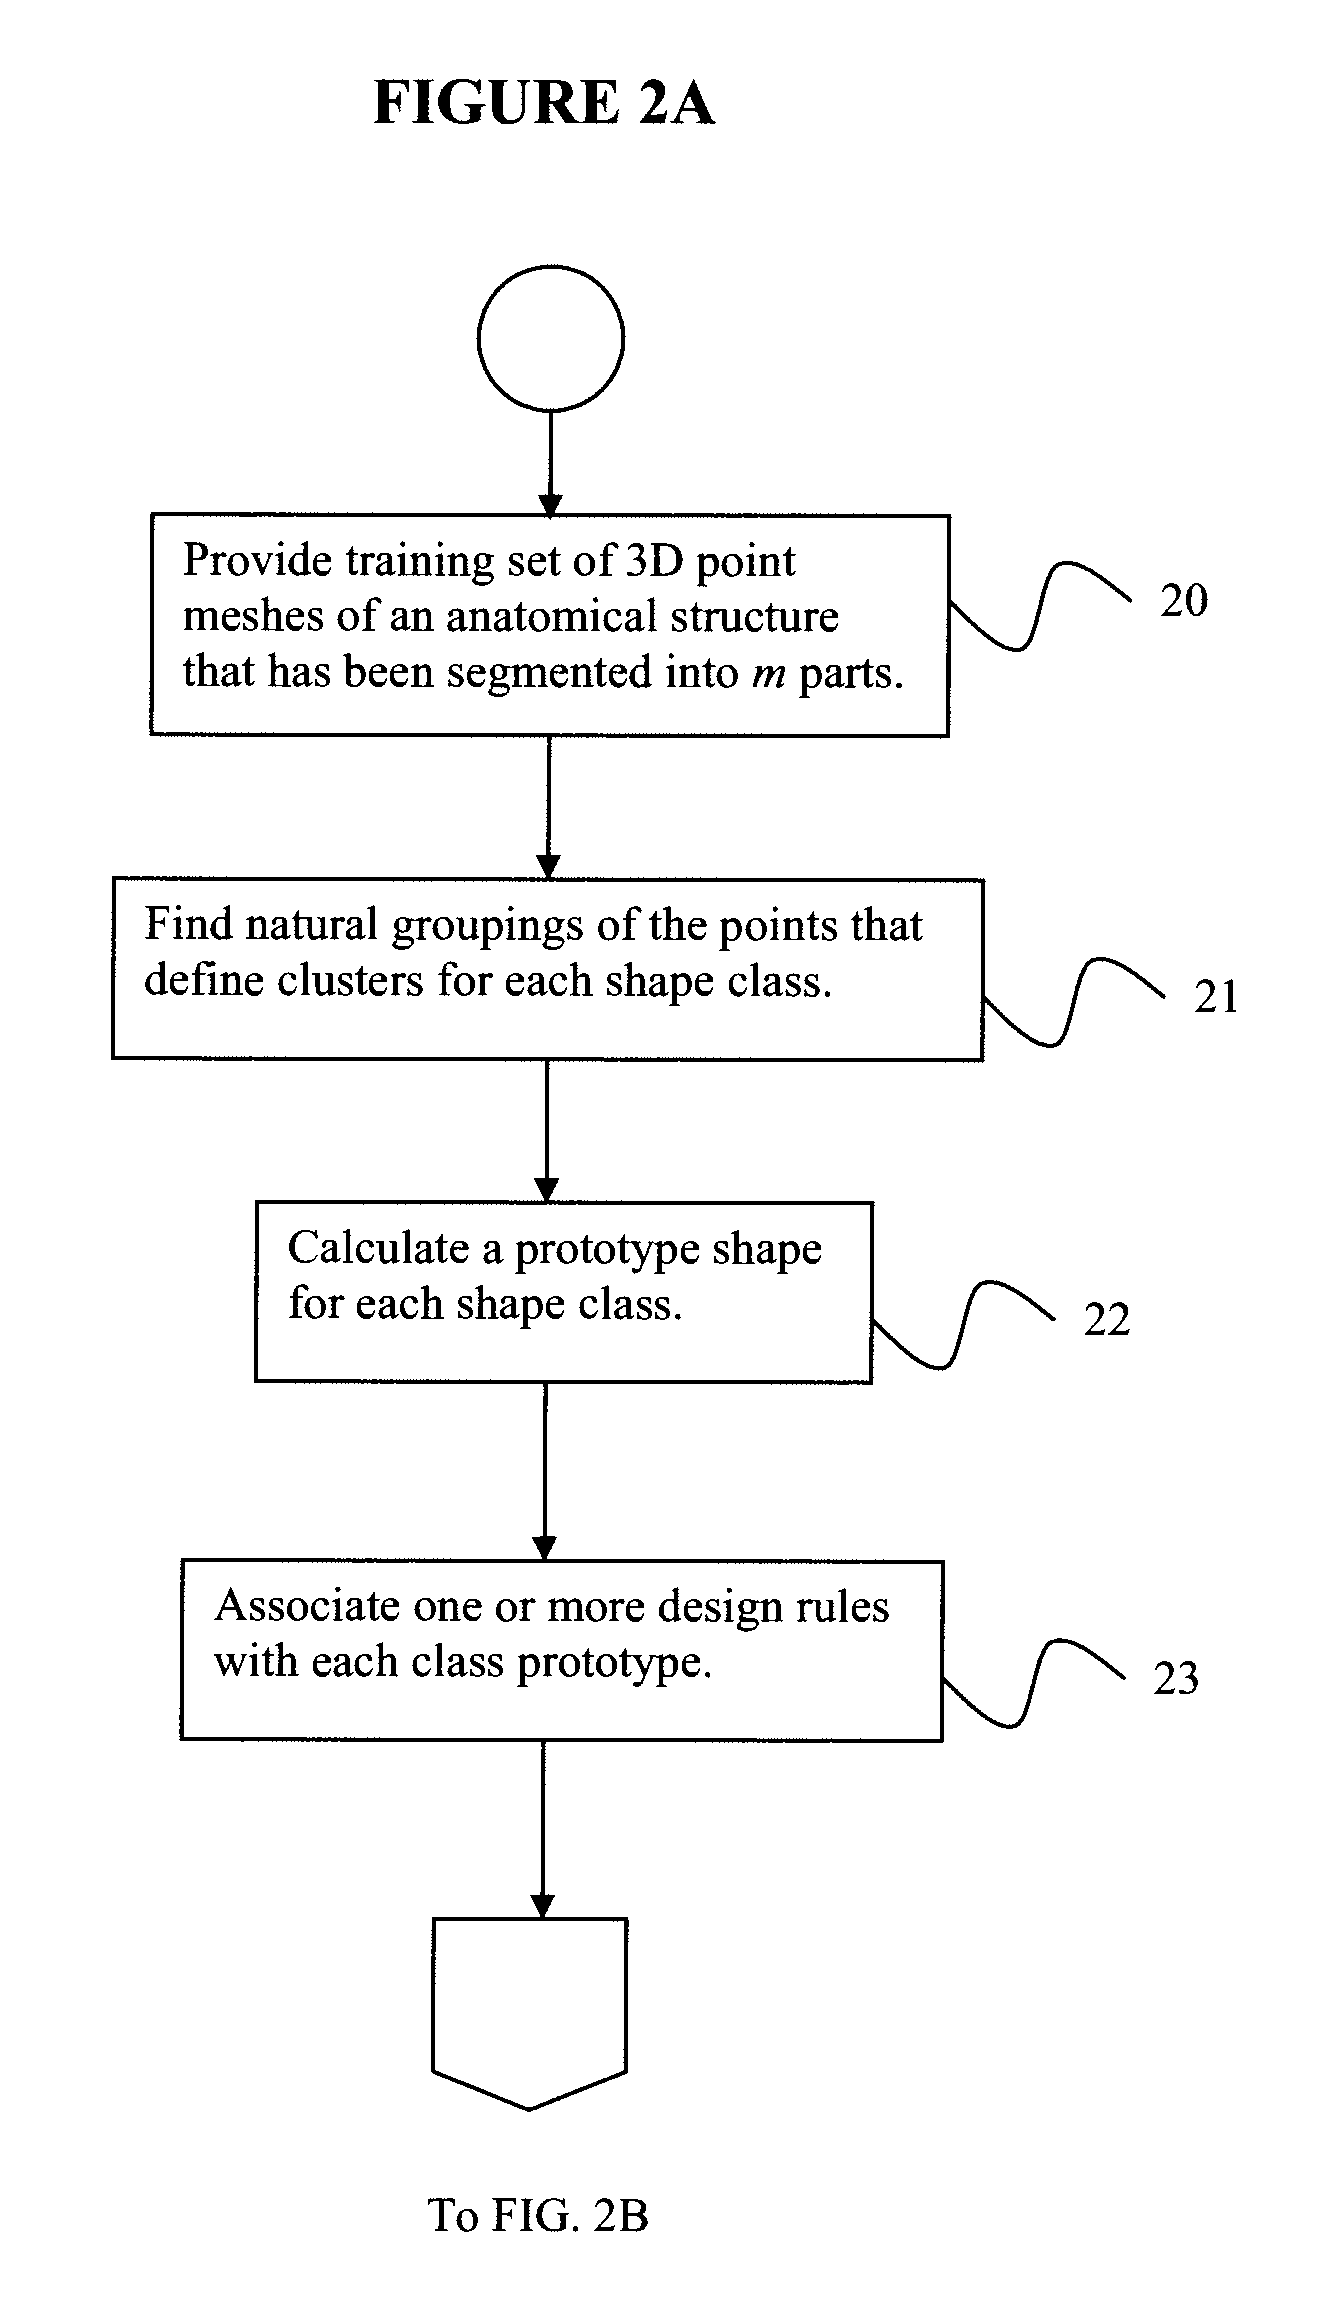 System and method for prototyping by learning from examples wherein a prototype is calculated for each shape class cluster